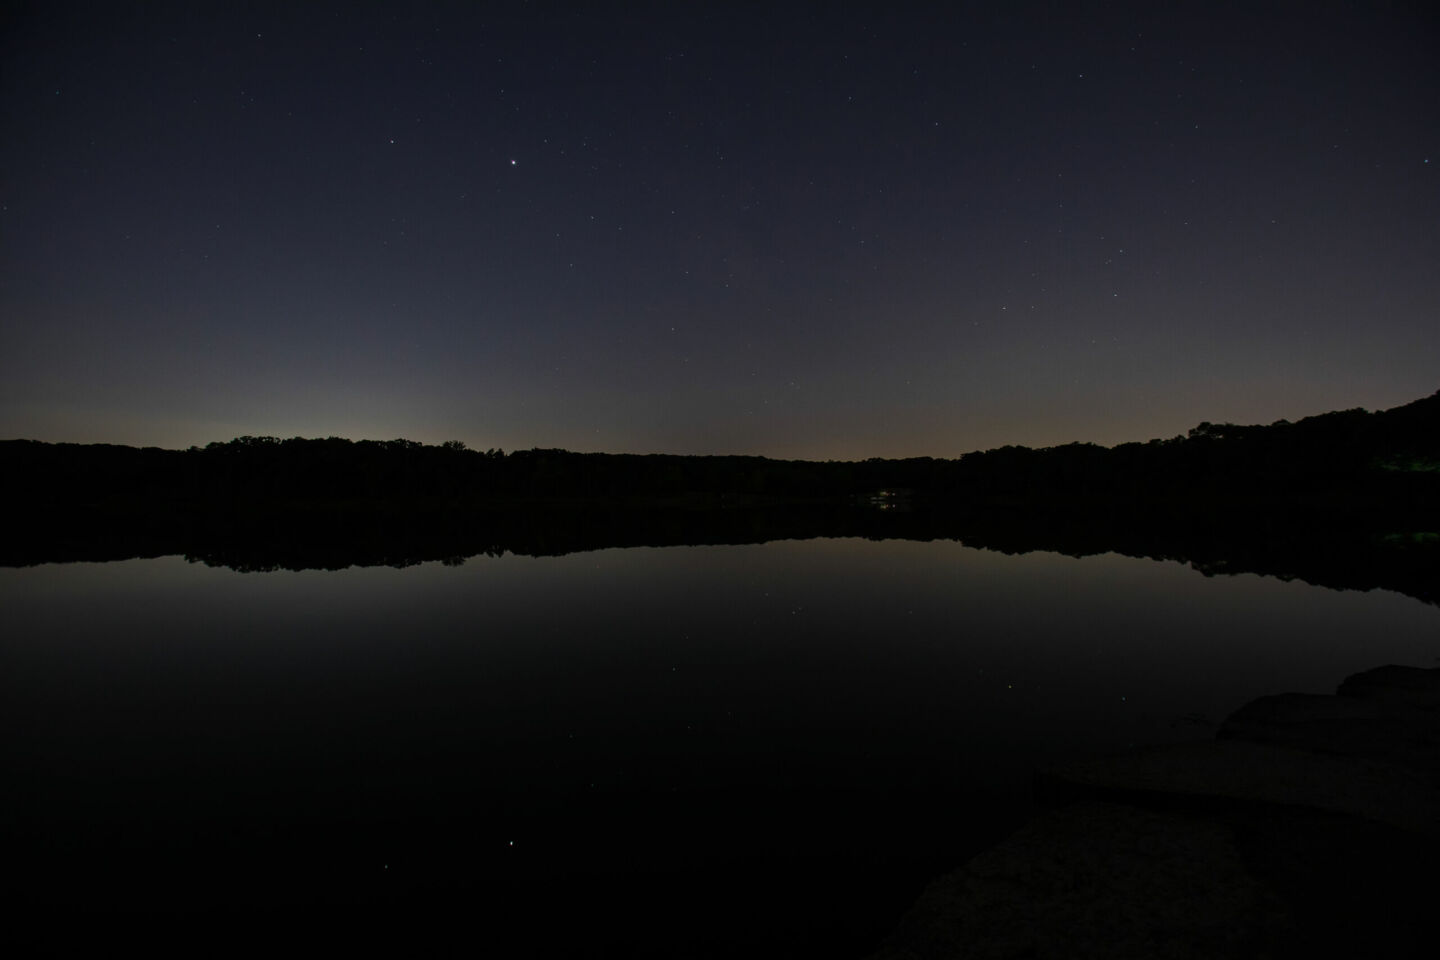 Image depicting the Urban Night Sky Place at night overlooking Maple Lake.